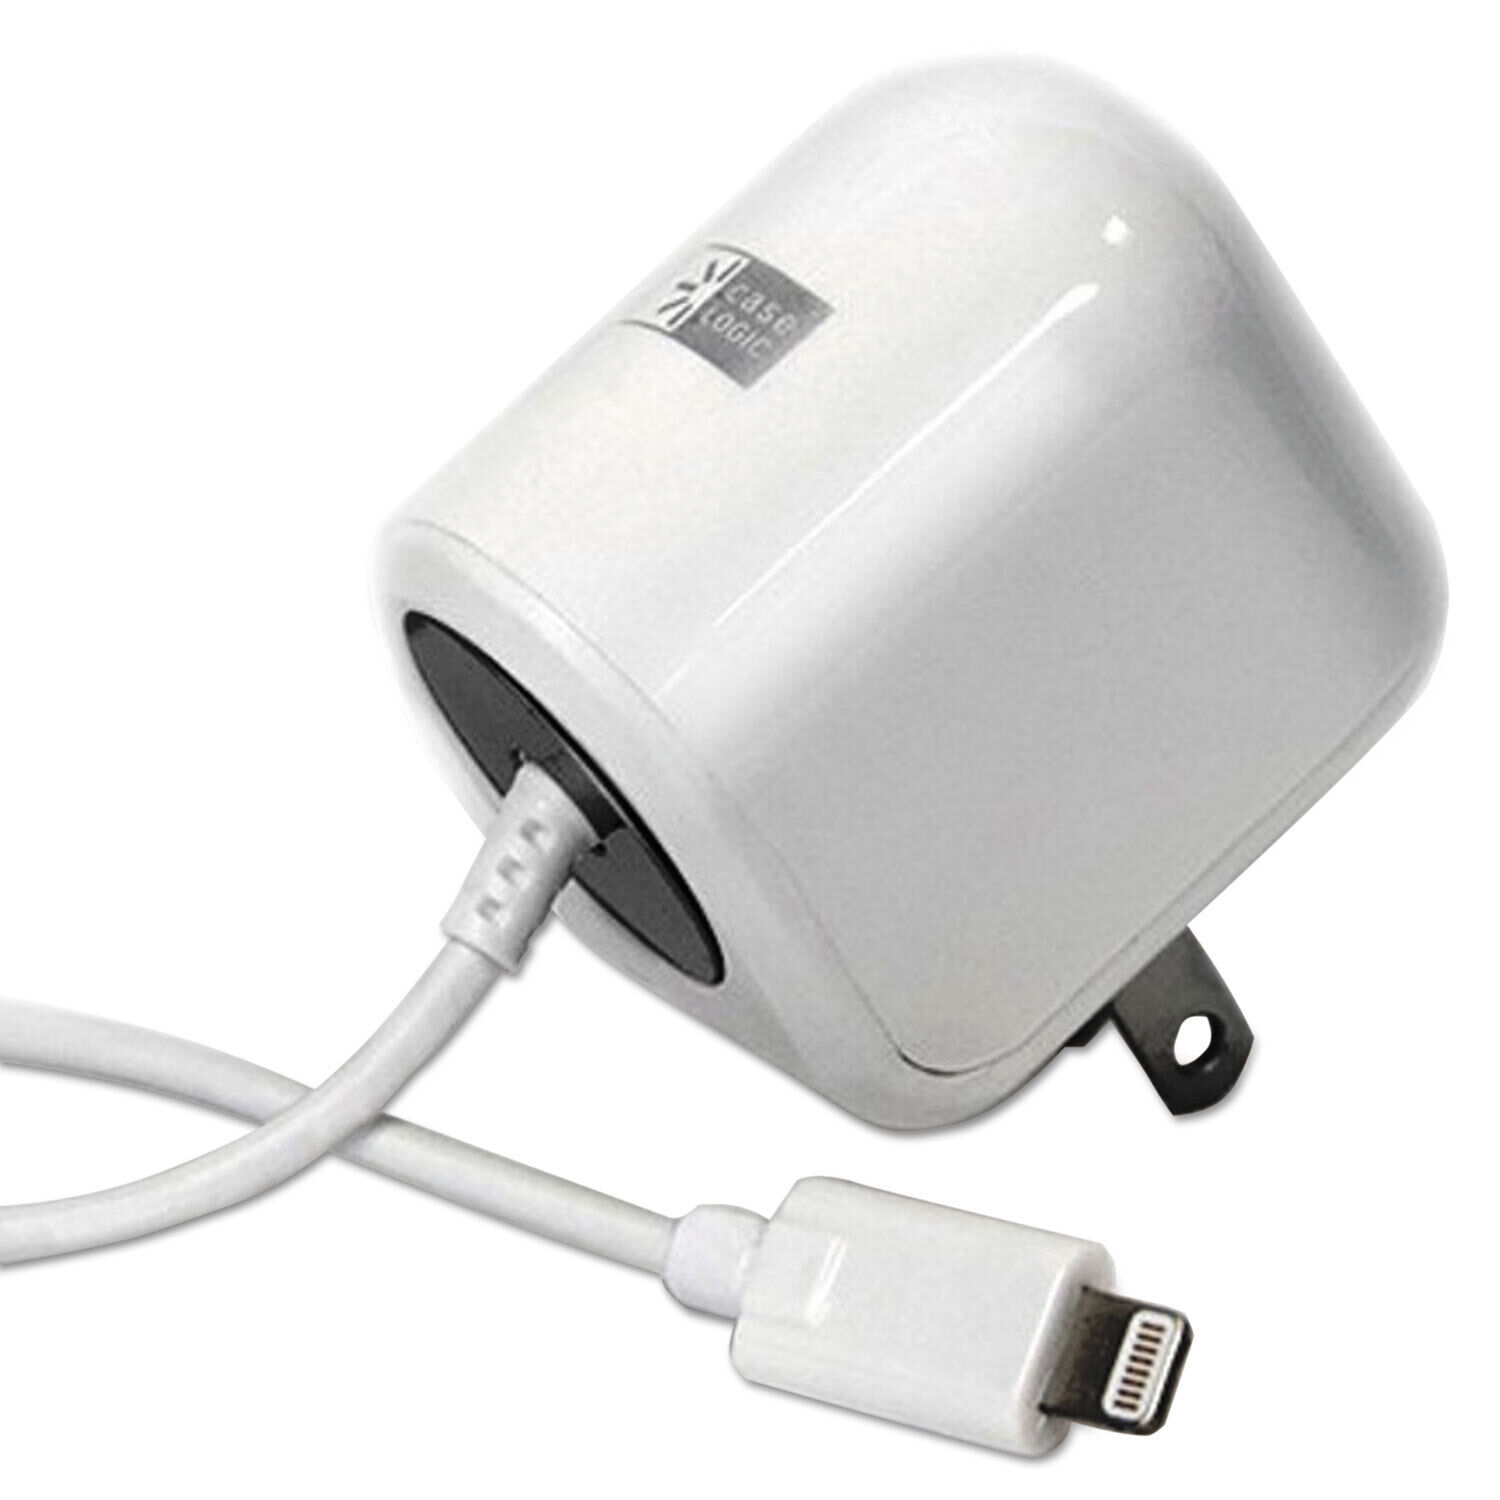 Case Logic Dedicated Lightning Home Charger 2.1 Amp White CLTCMF